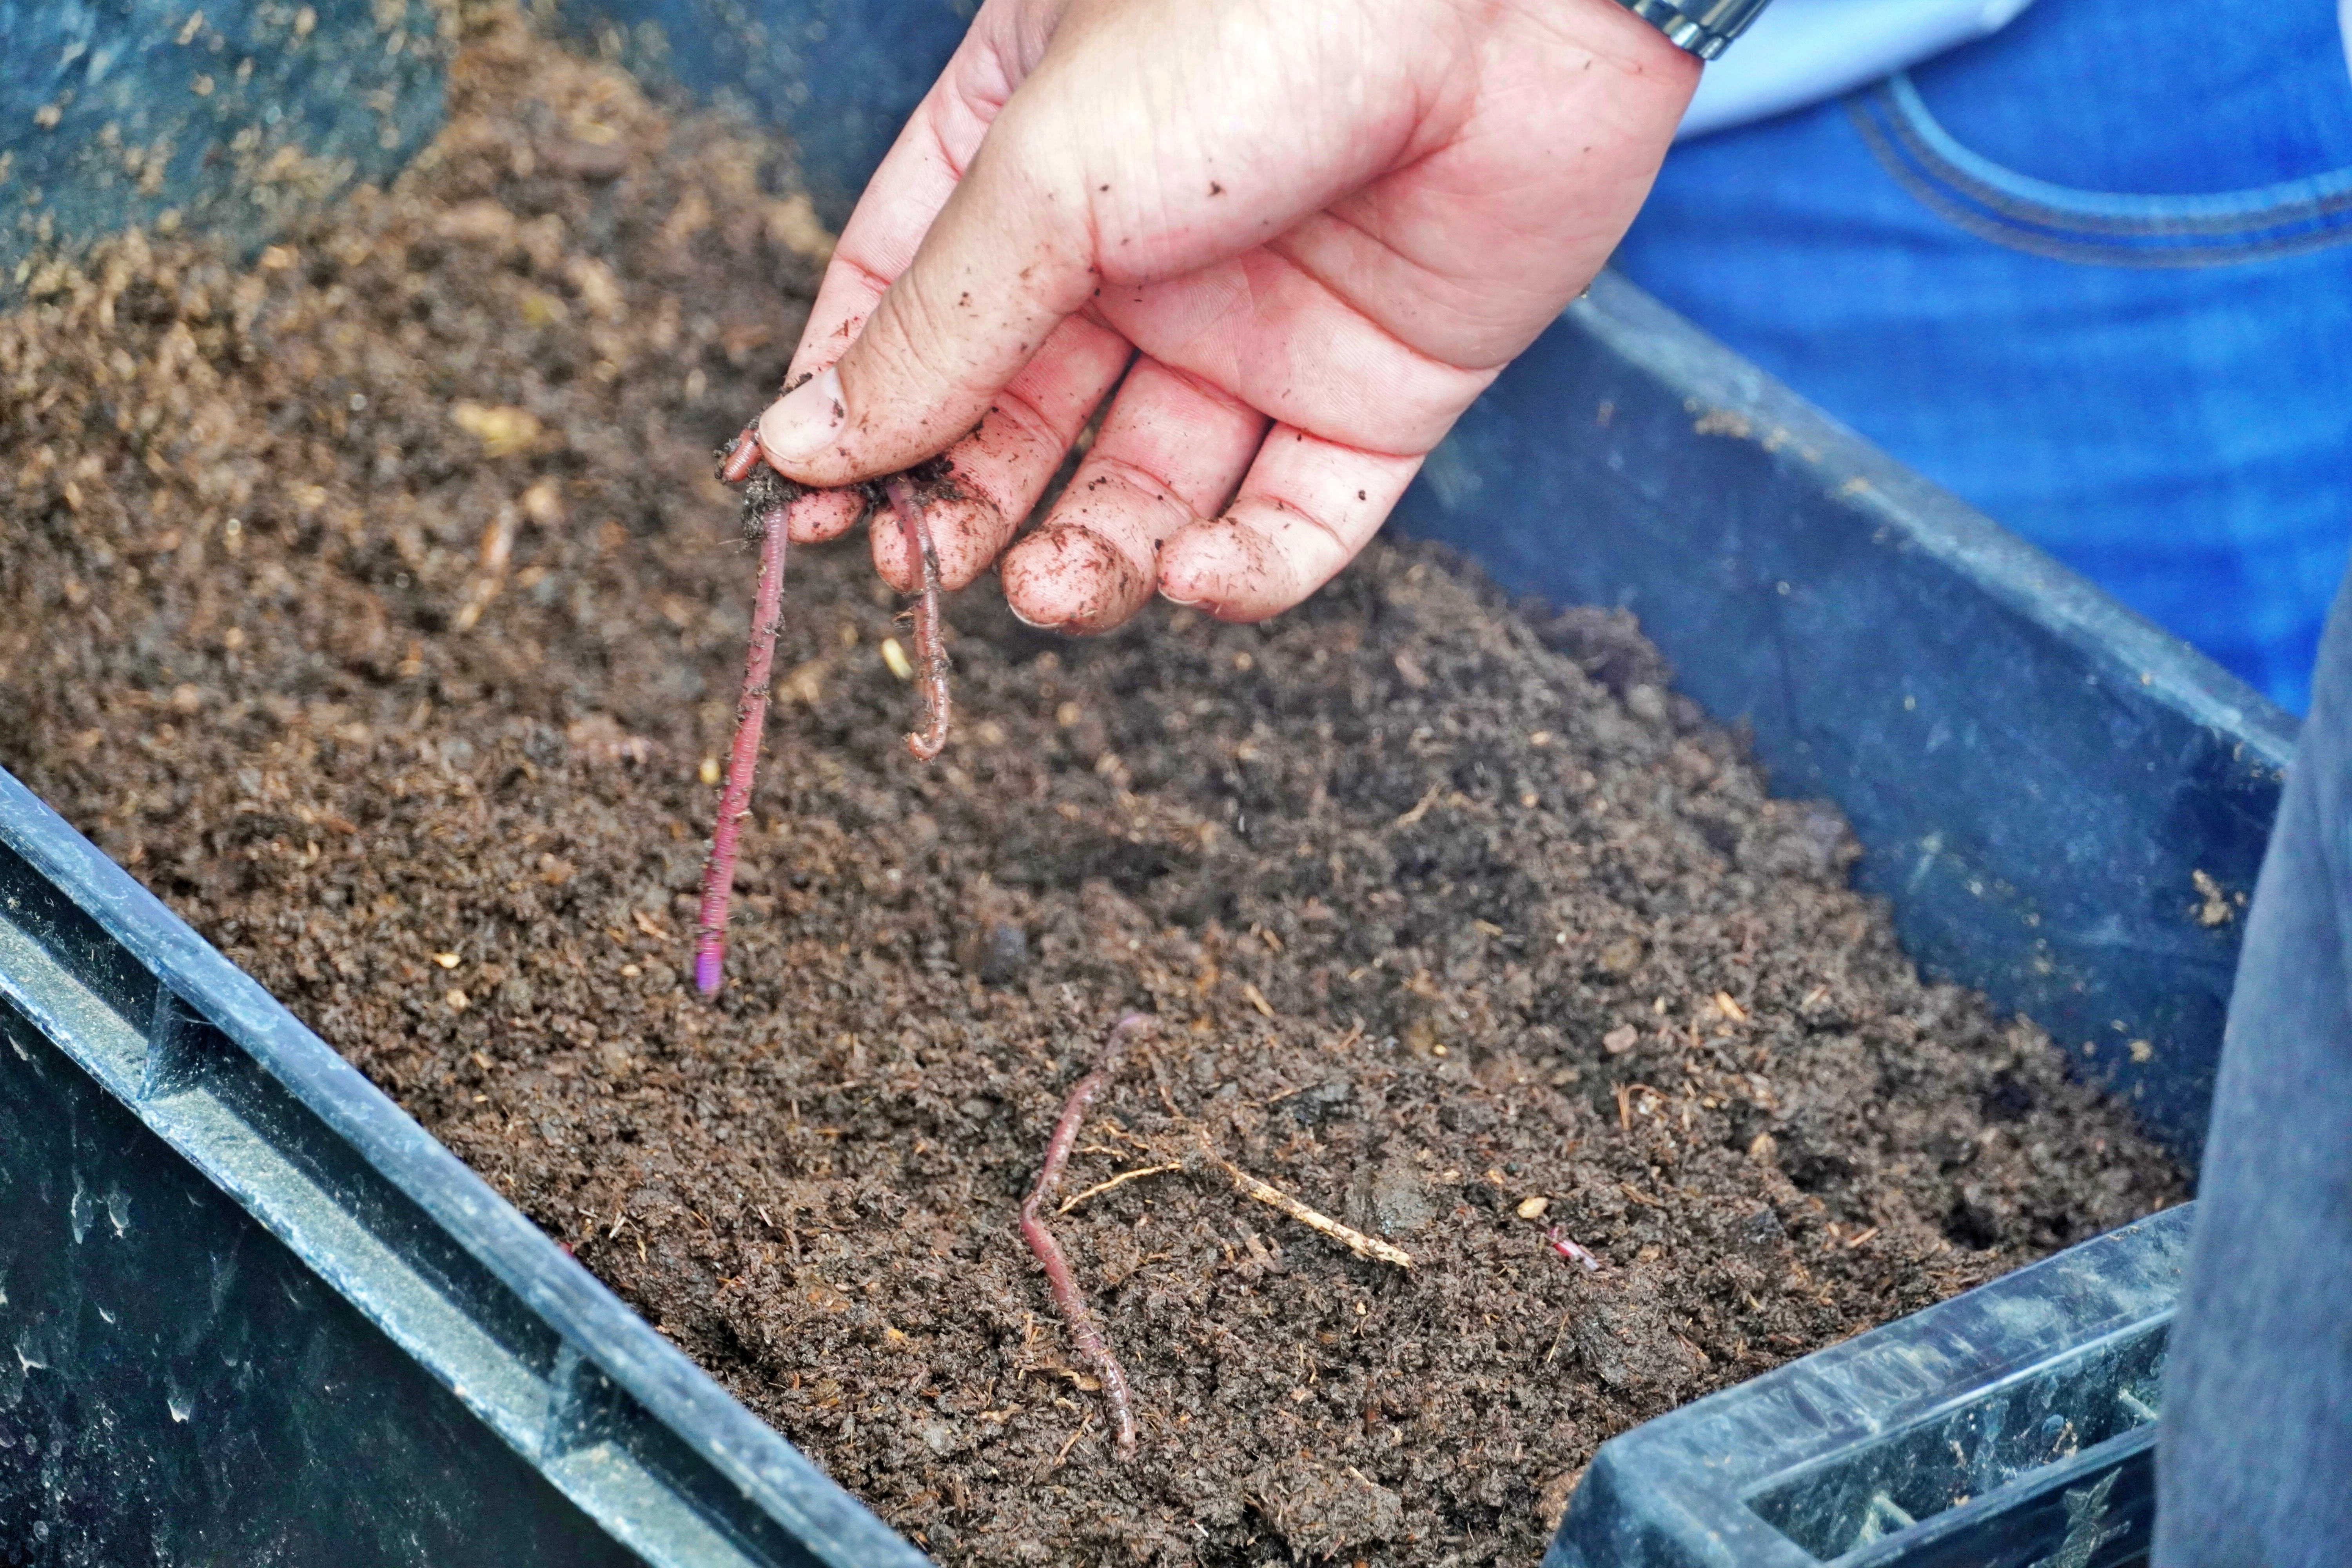 Organic form of fertiliser produced from earthworms or so-called vermicast